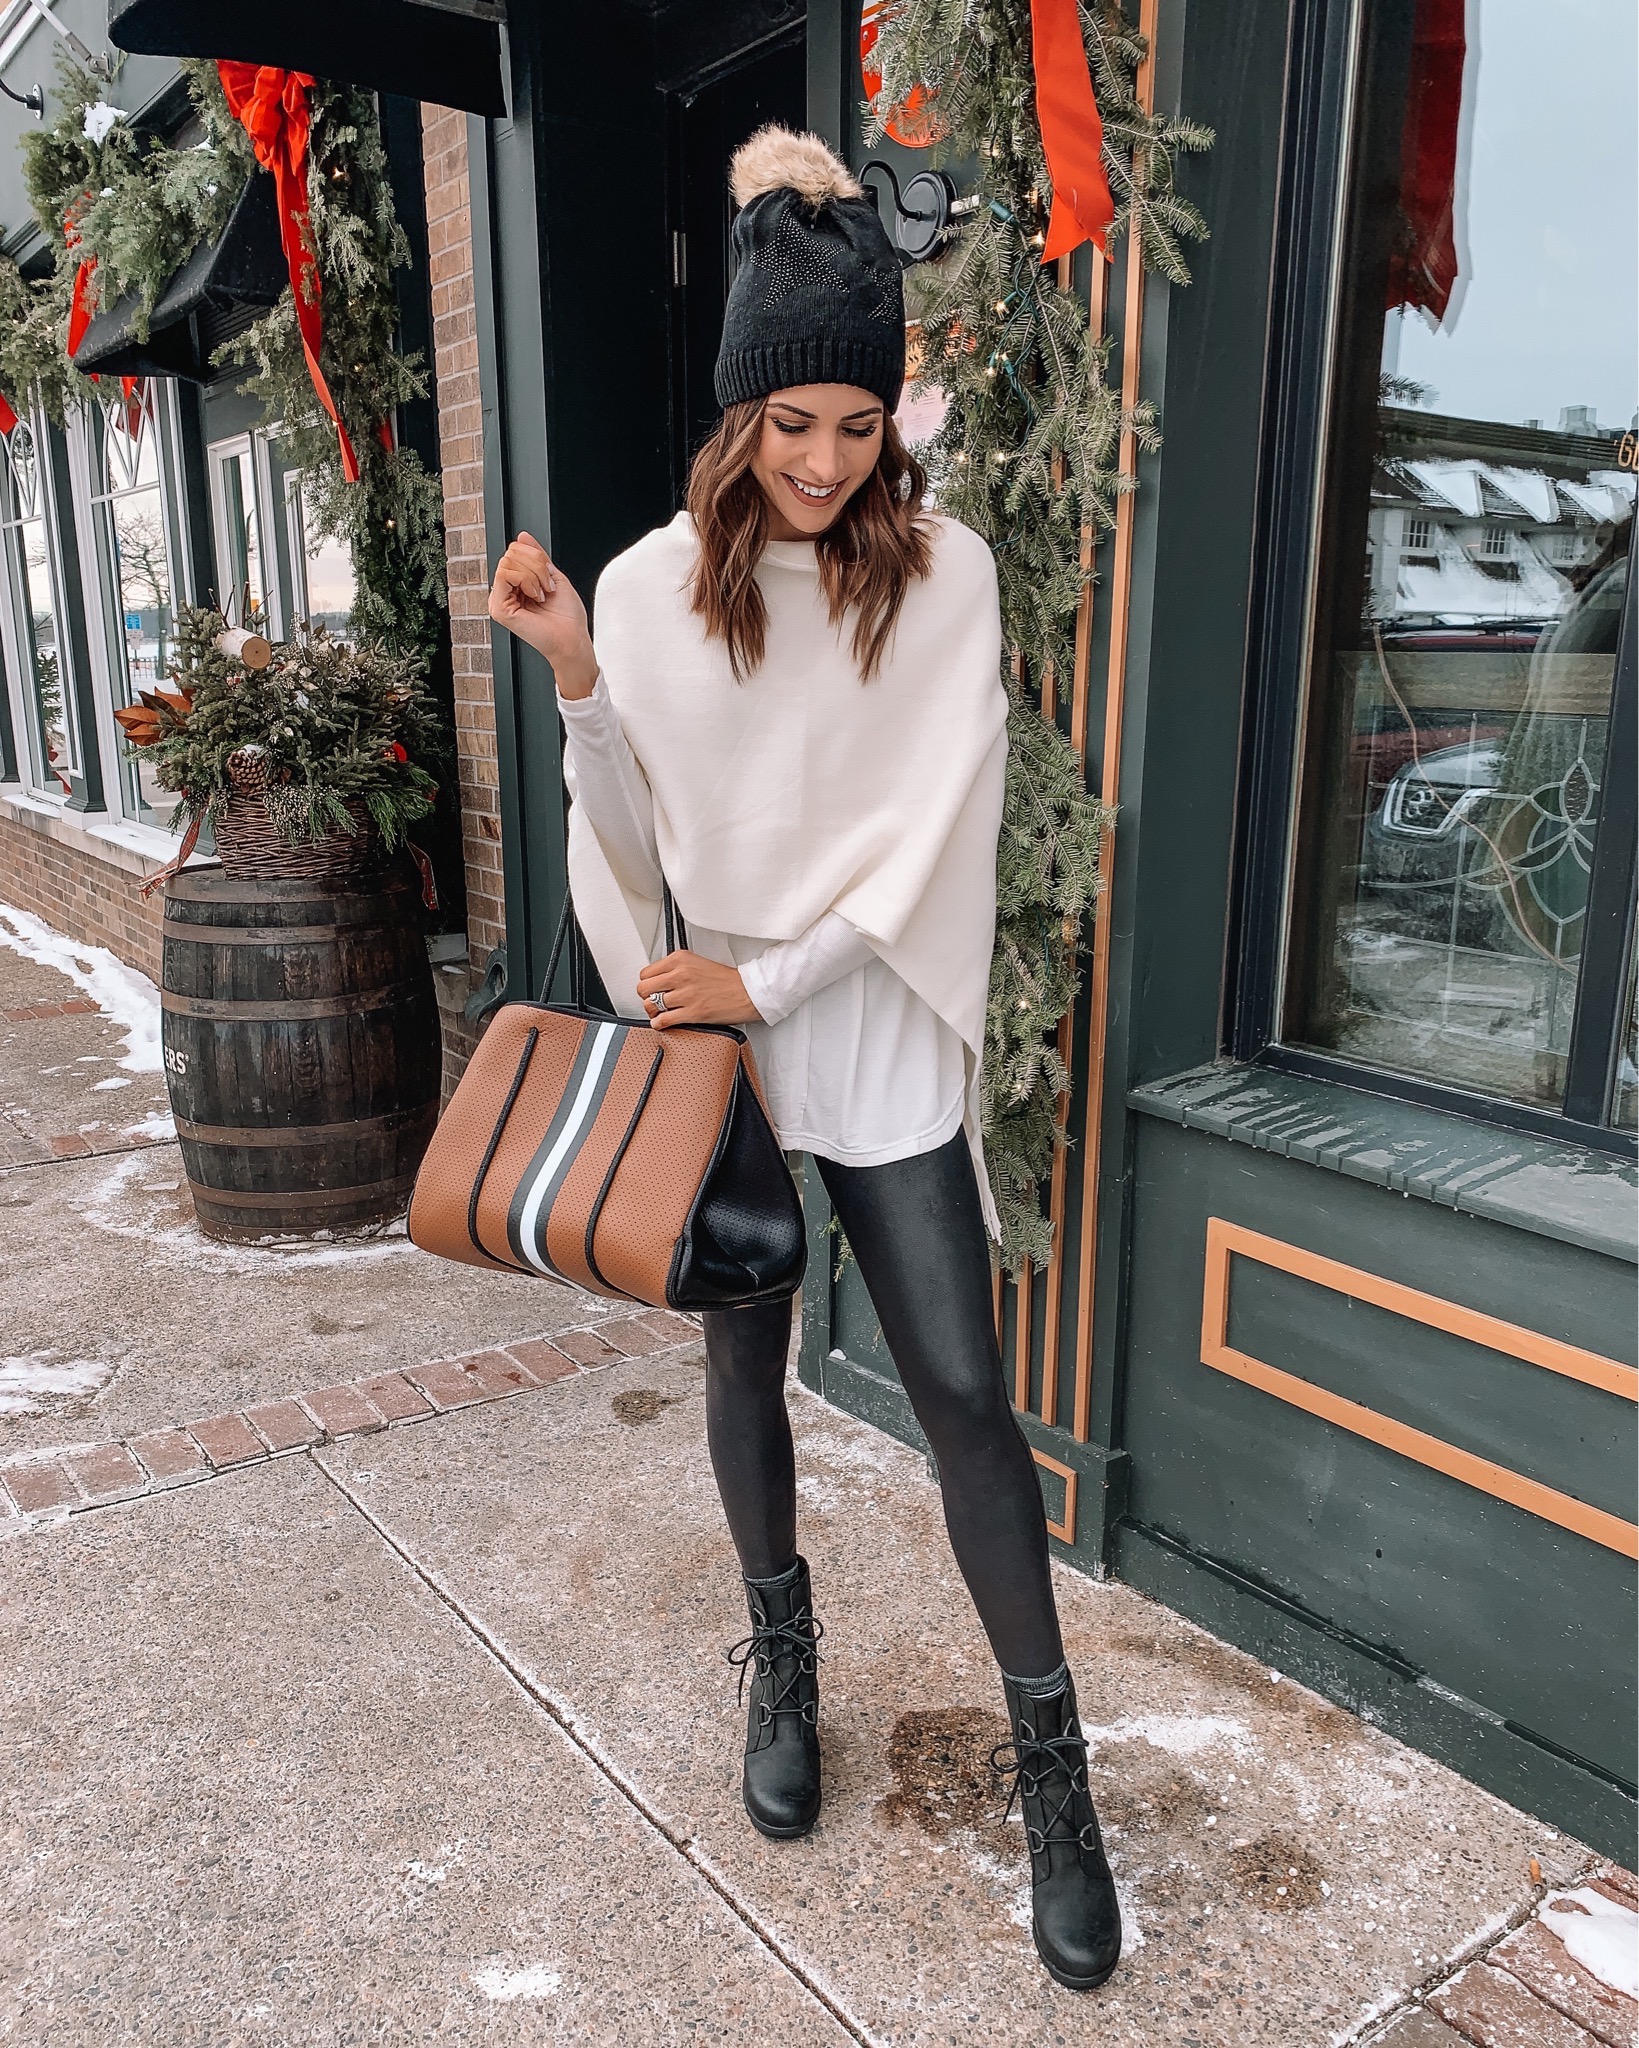 https://thestyledpress.com/wp-content/uploads/2020/02/sorel-joan-of-arctic-black-boots-outfit.jpg